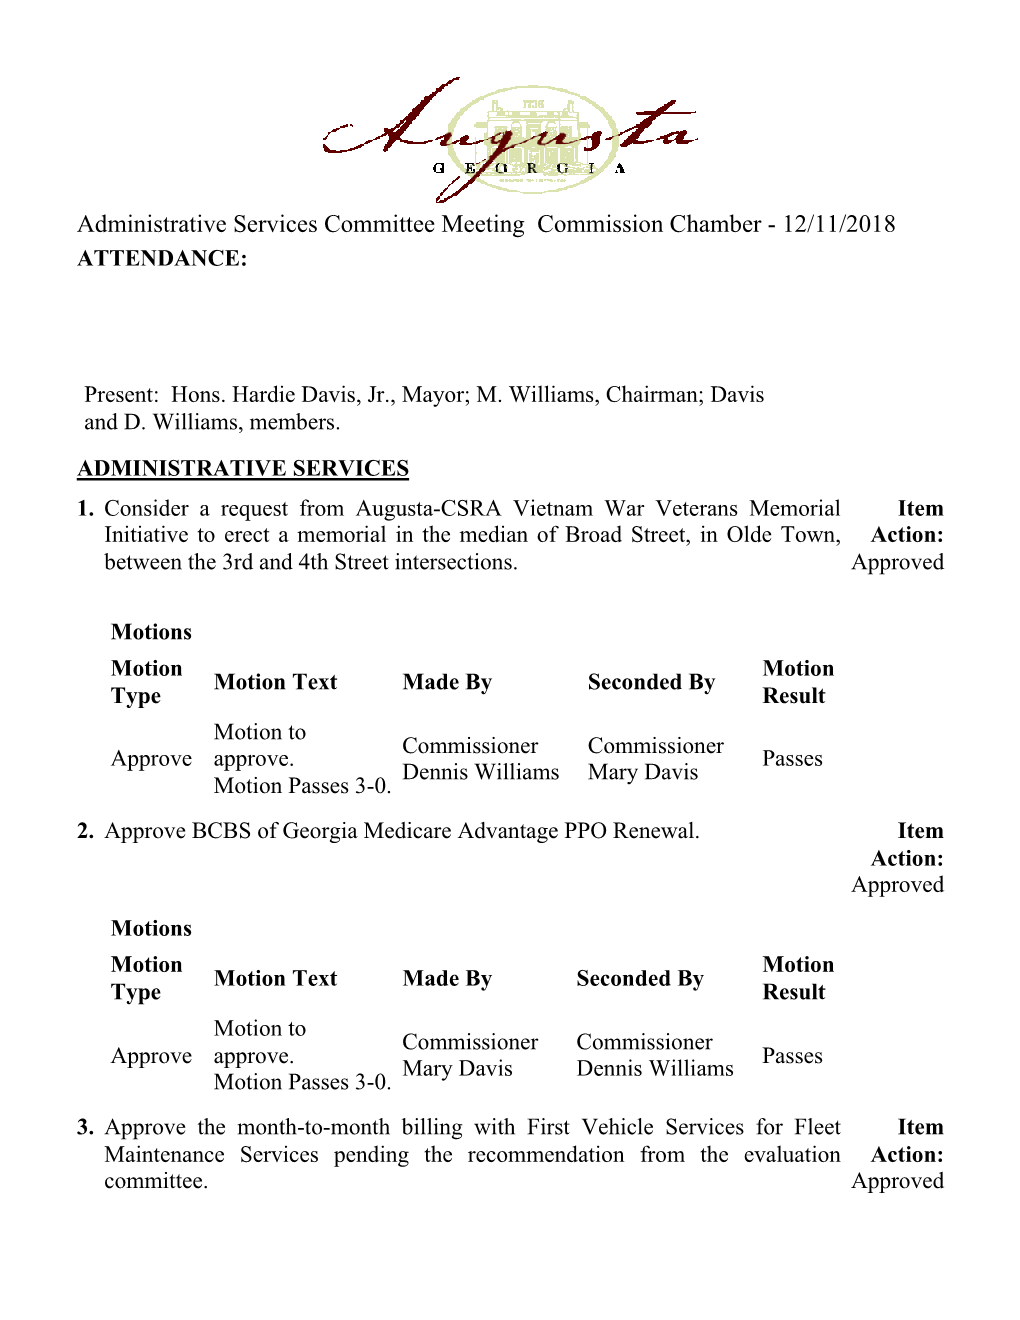 Administrative Services Committee Meeting Commission Chamber - 12/11/2018 ATTENDANCE